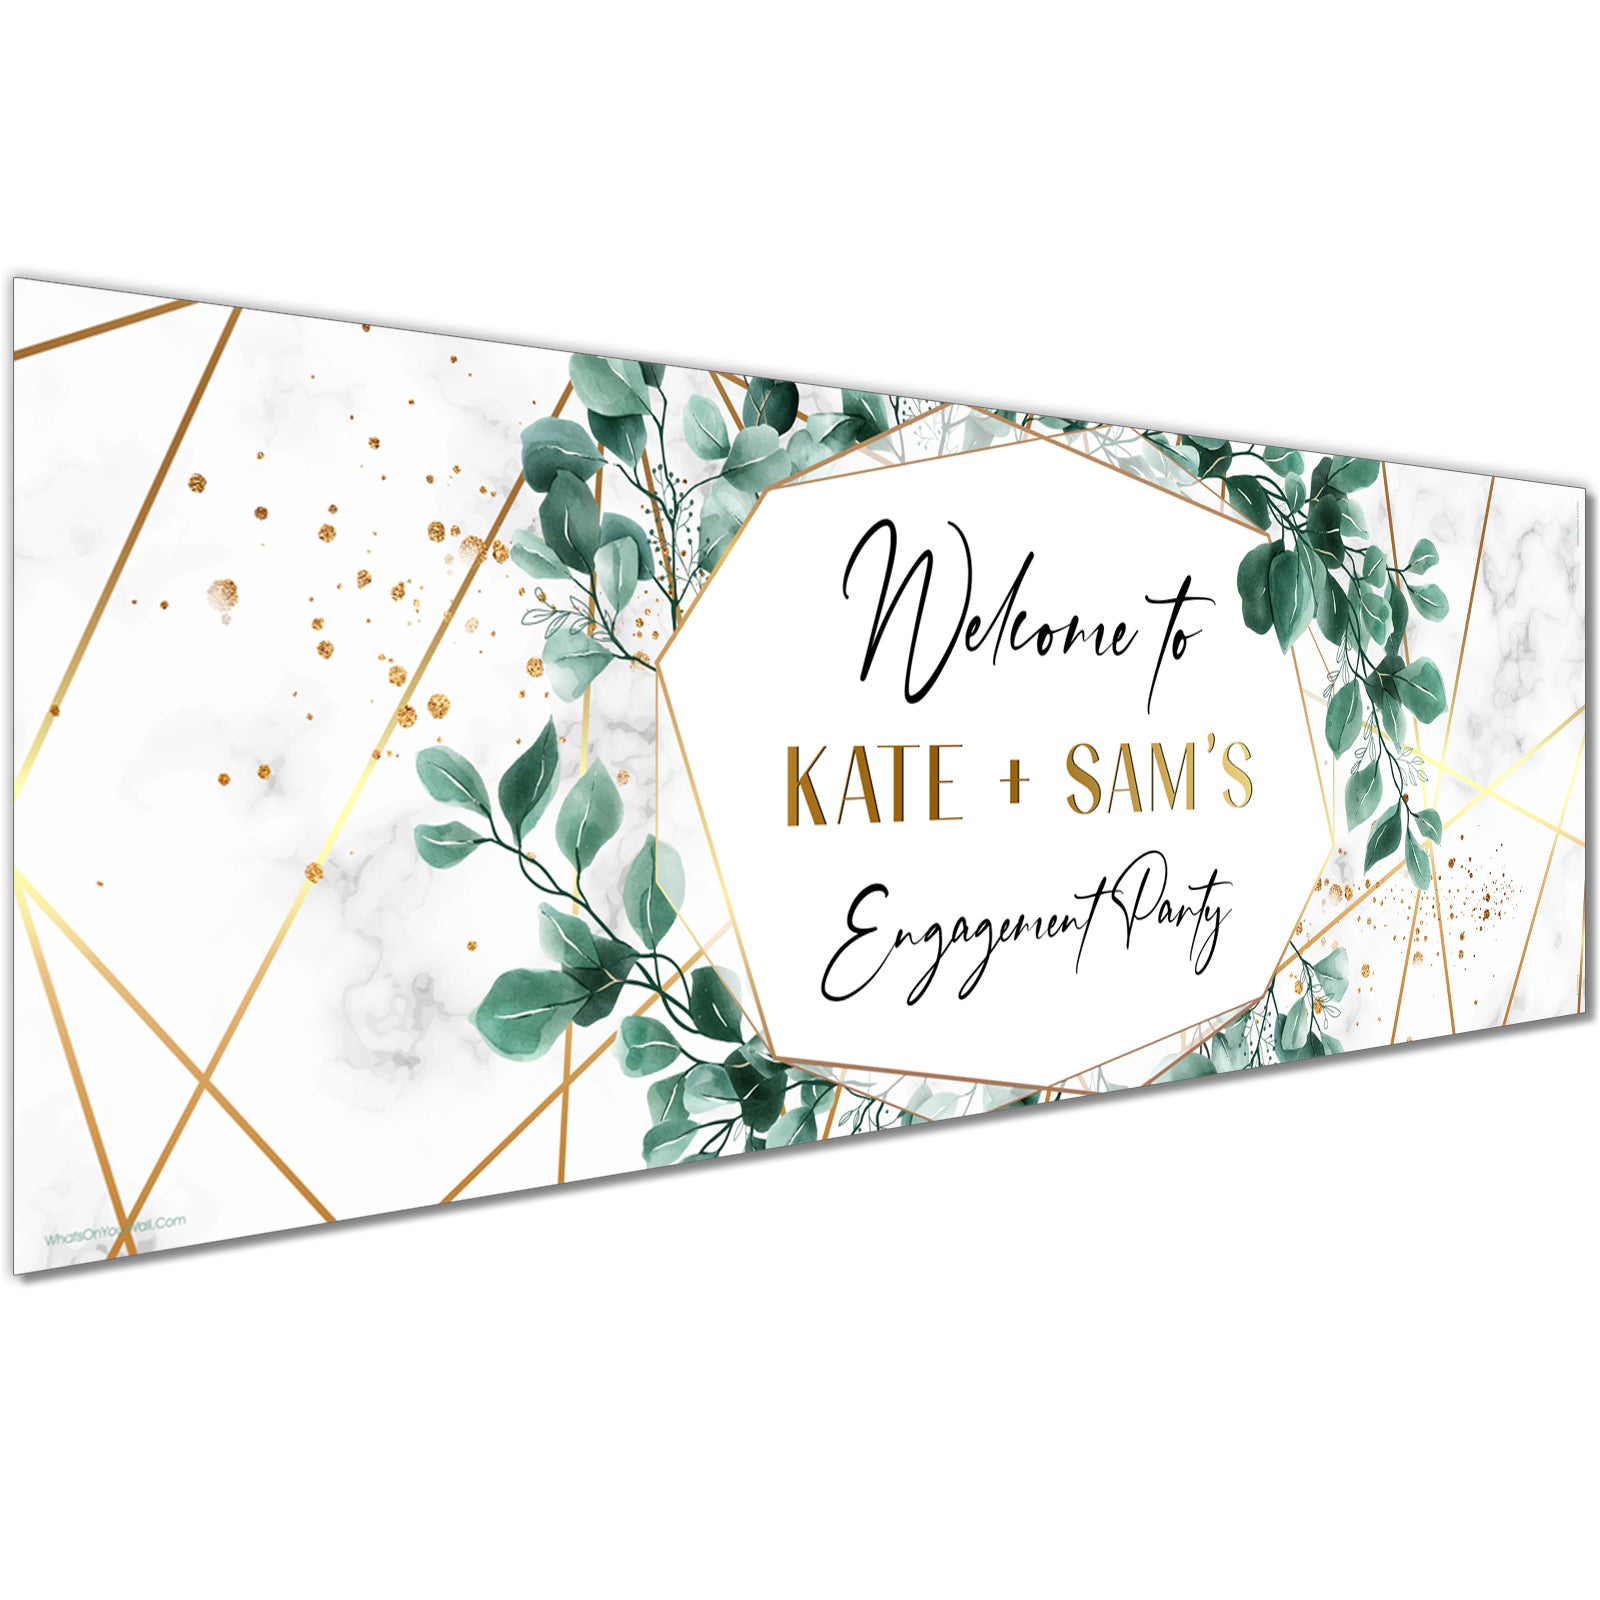 Personalised Engagement Banners in Botanical Leaf Design